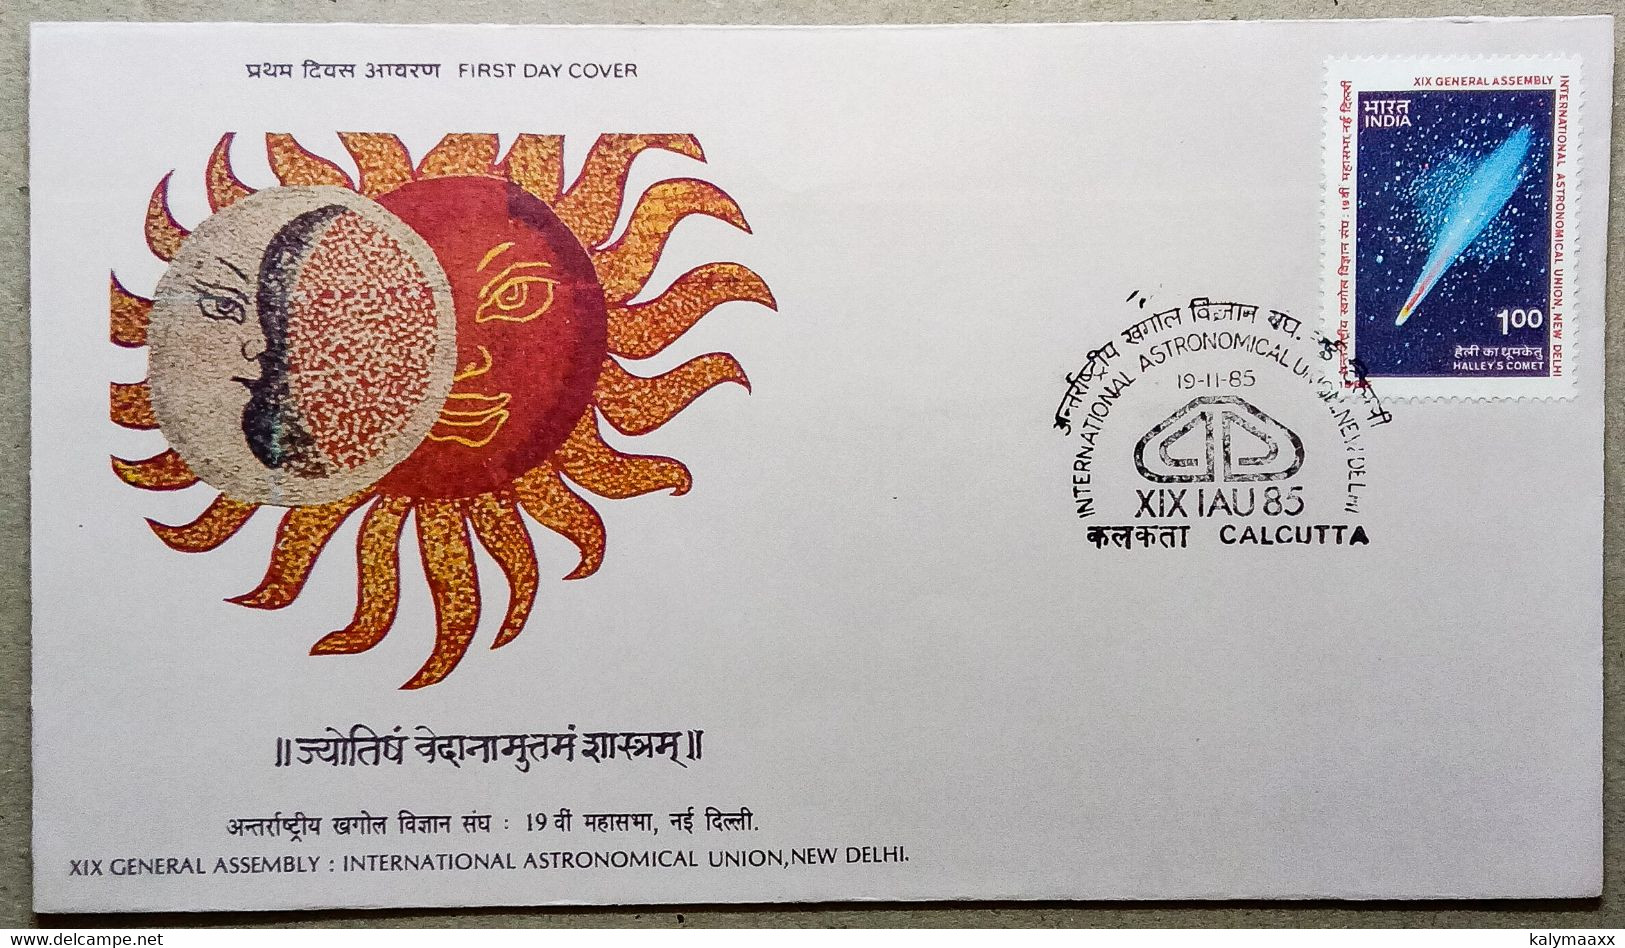 INDIA 1985 HALLEY'S COMET, INTERNATIONAL ASTRONOMICAL UNION, SPACE, SCIENCE, COMET, SUN, MOON....FDC - Asien